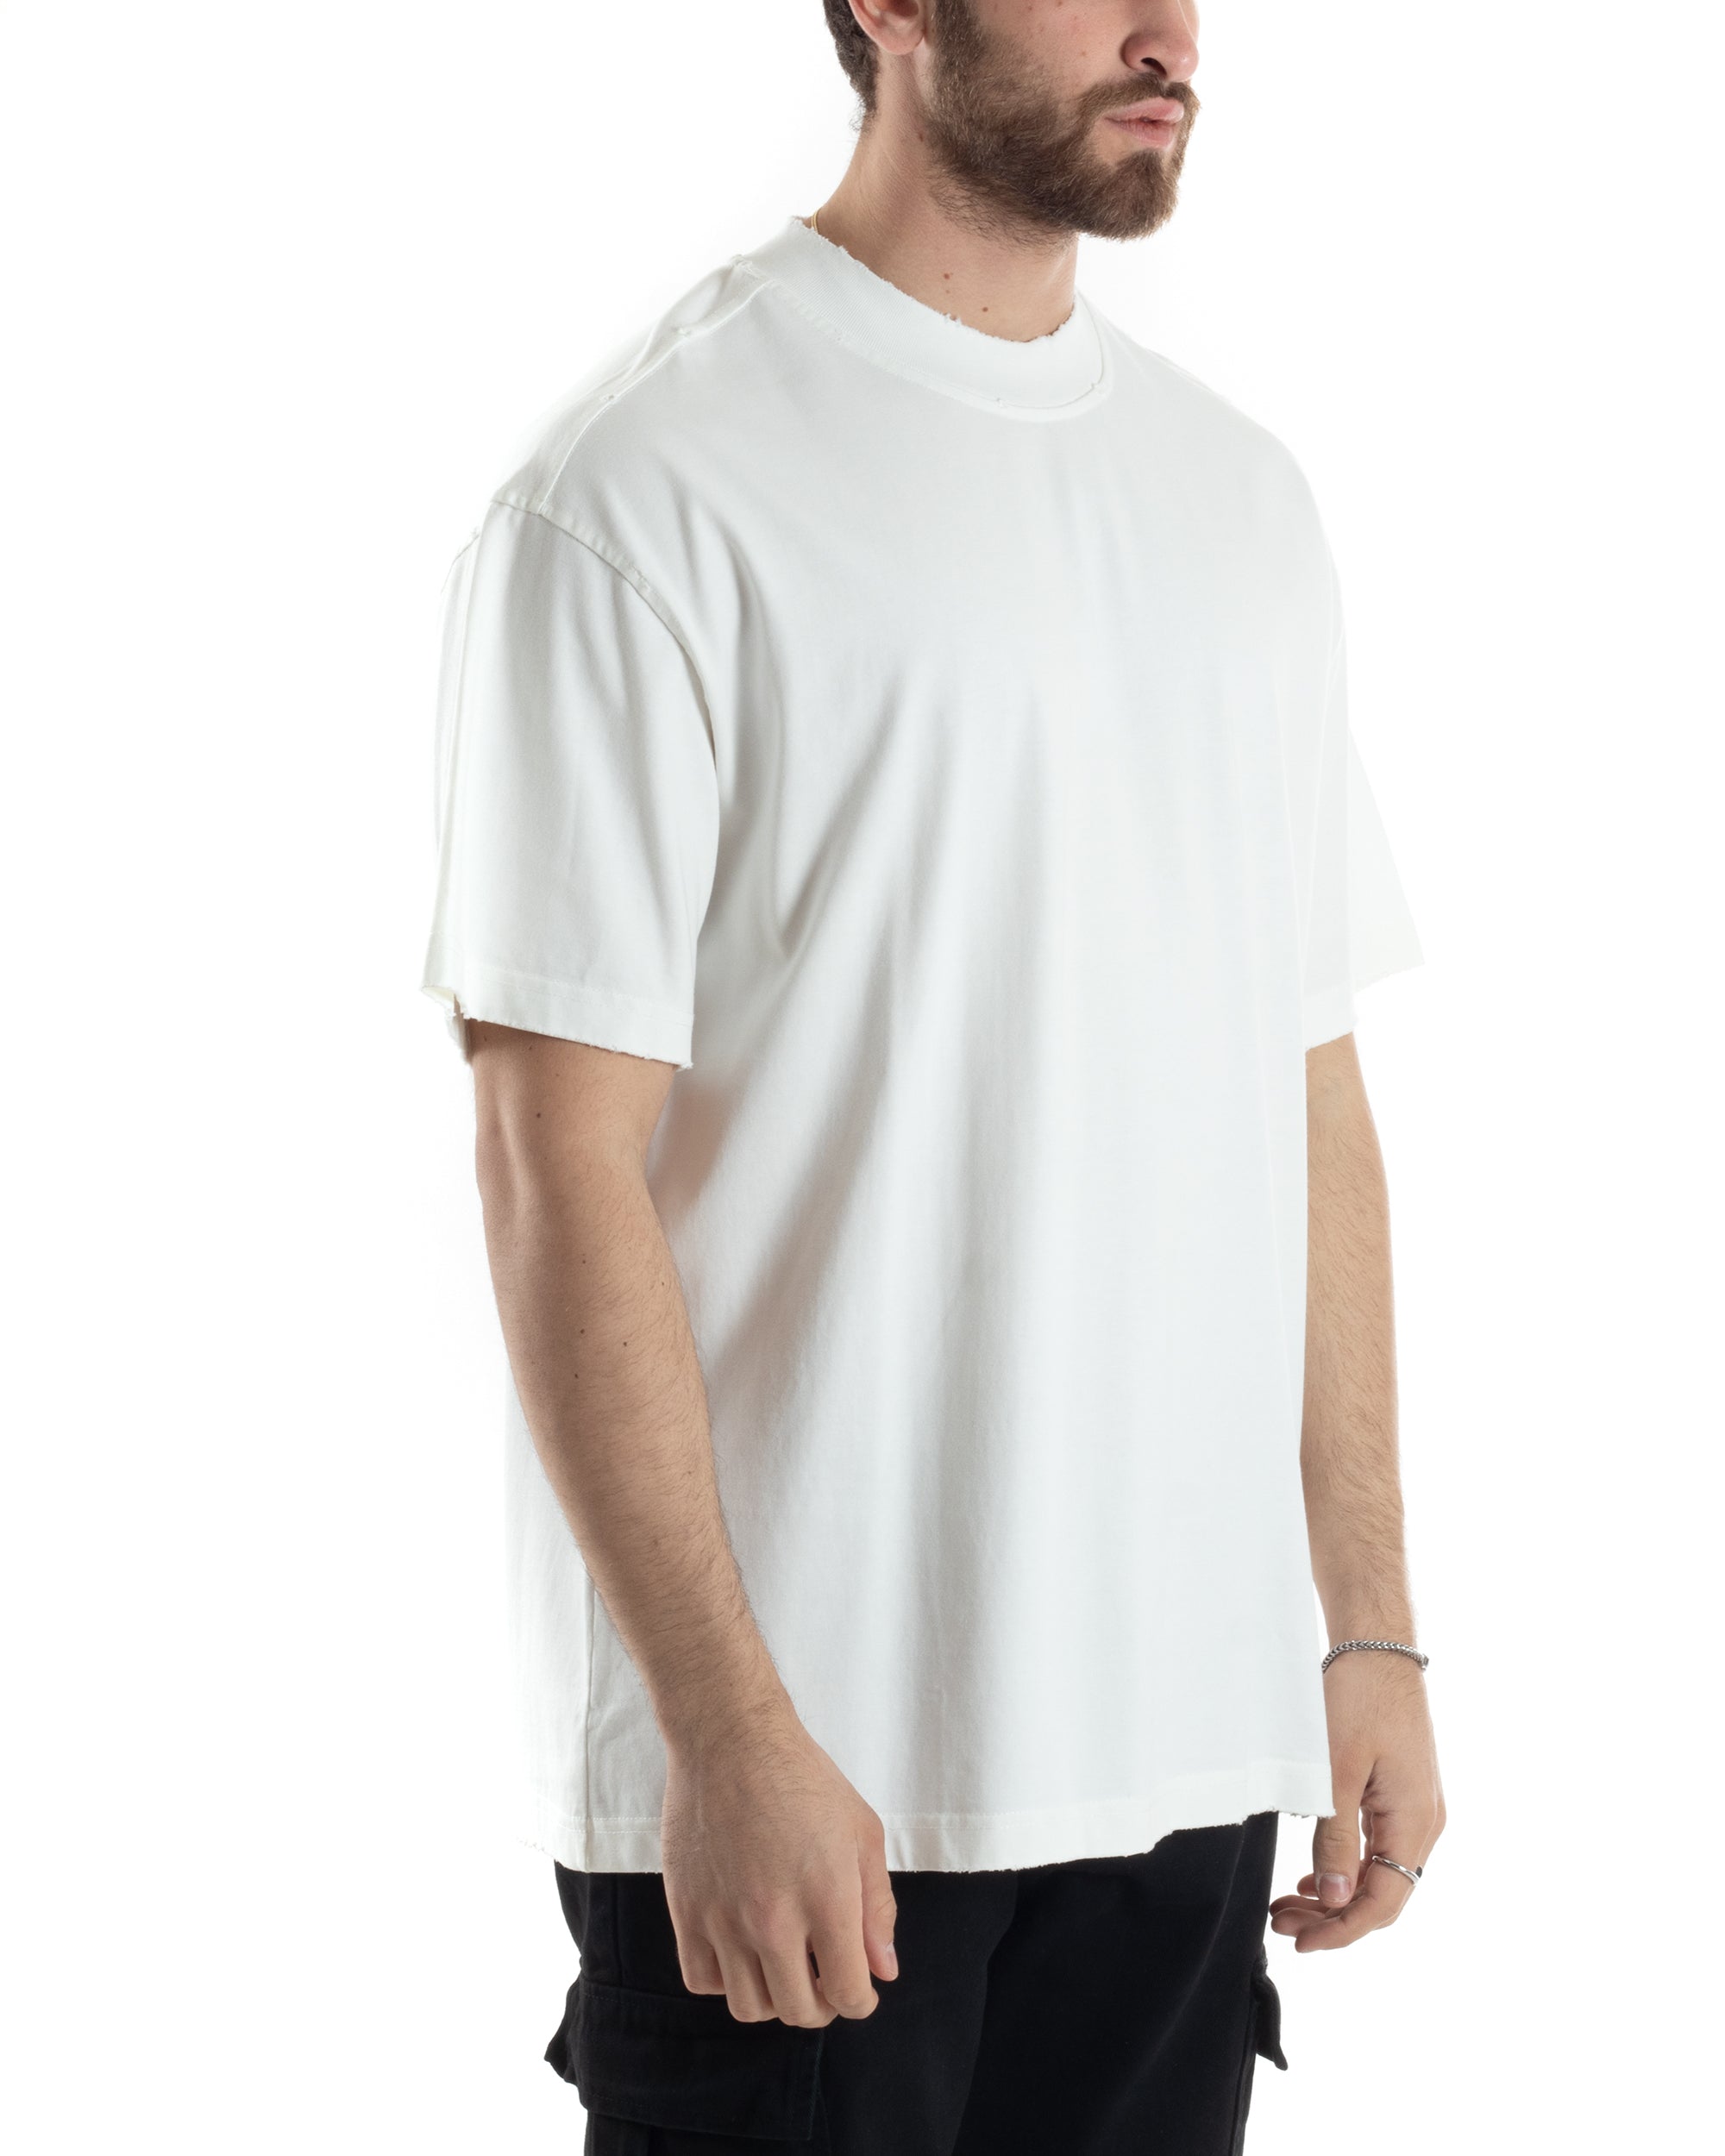 T-shirt Uomo Girocollo Boxy Fit Cotone Basic Con Rotture Relaxed Fit Gola Alta Bianco GIOSAL-TS3017A